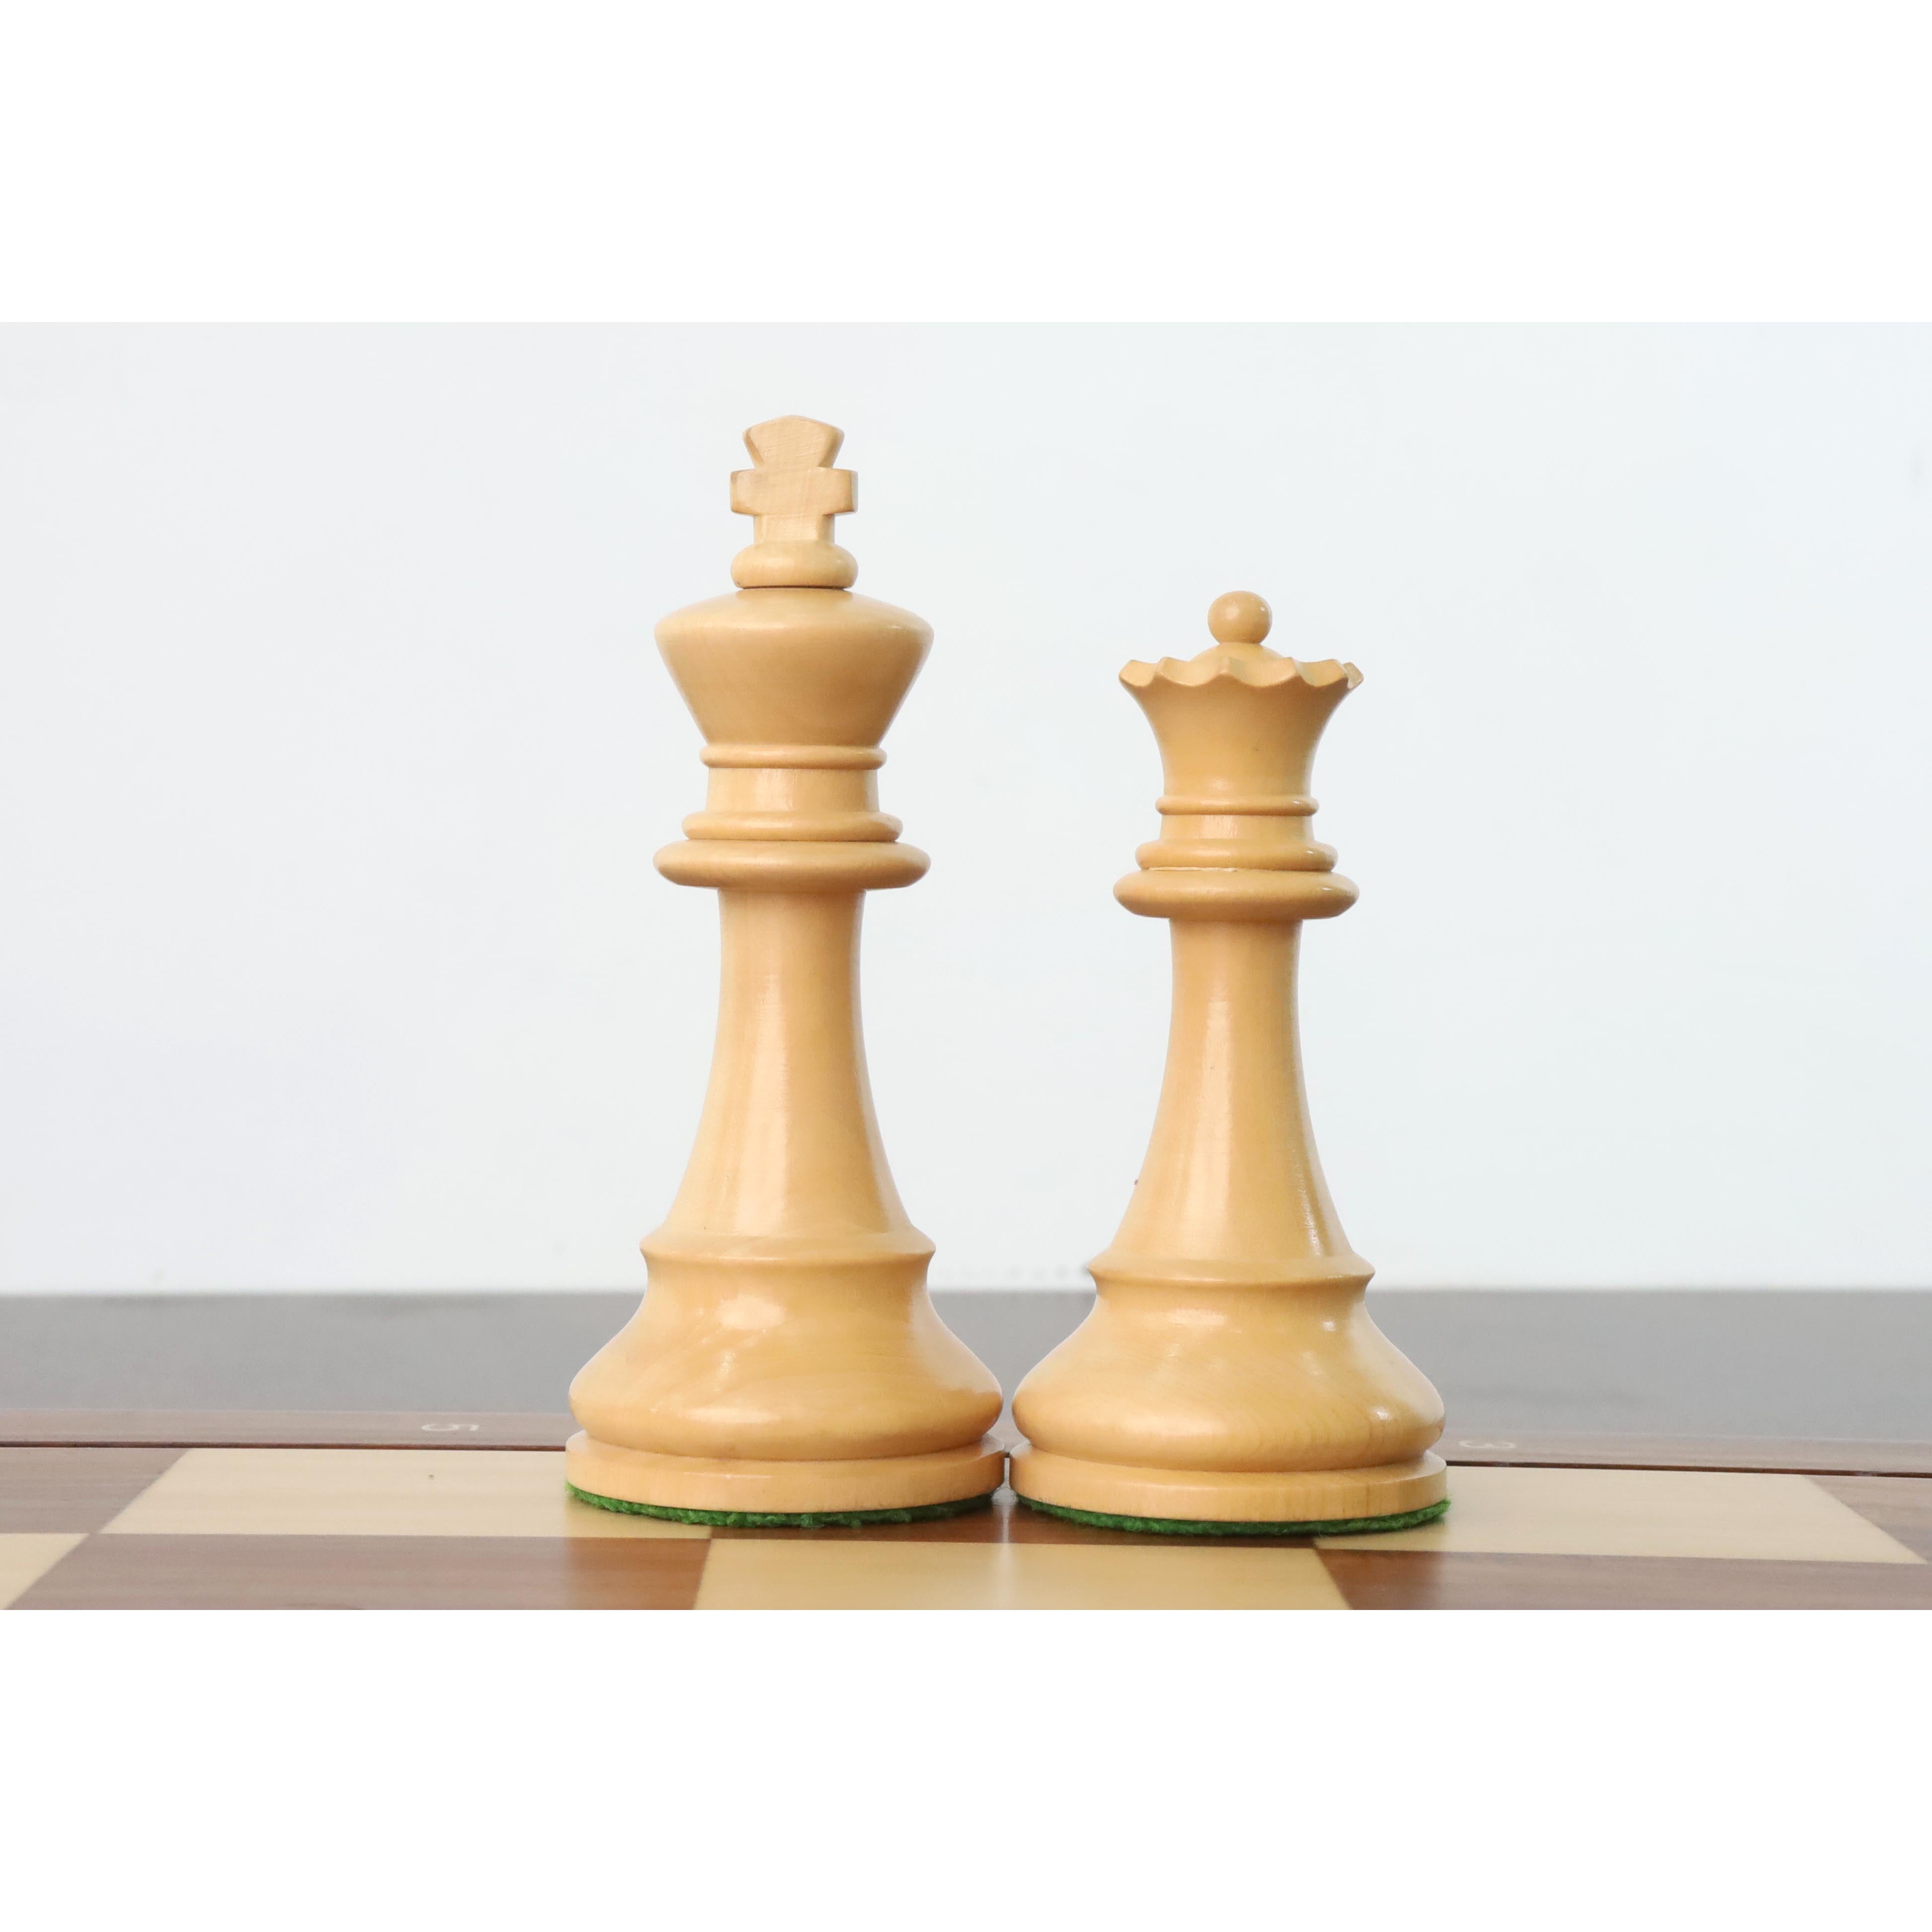 French Grandmaster's Staunton Chess Set- Chess Pieces Only- Golden Rosewood - 4.1" King